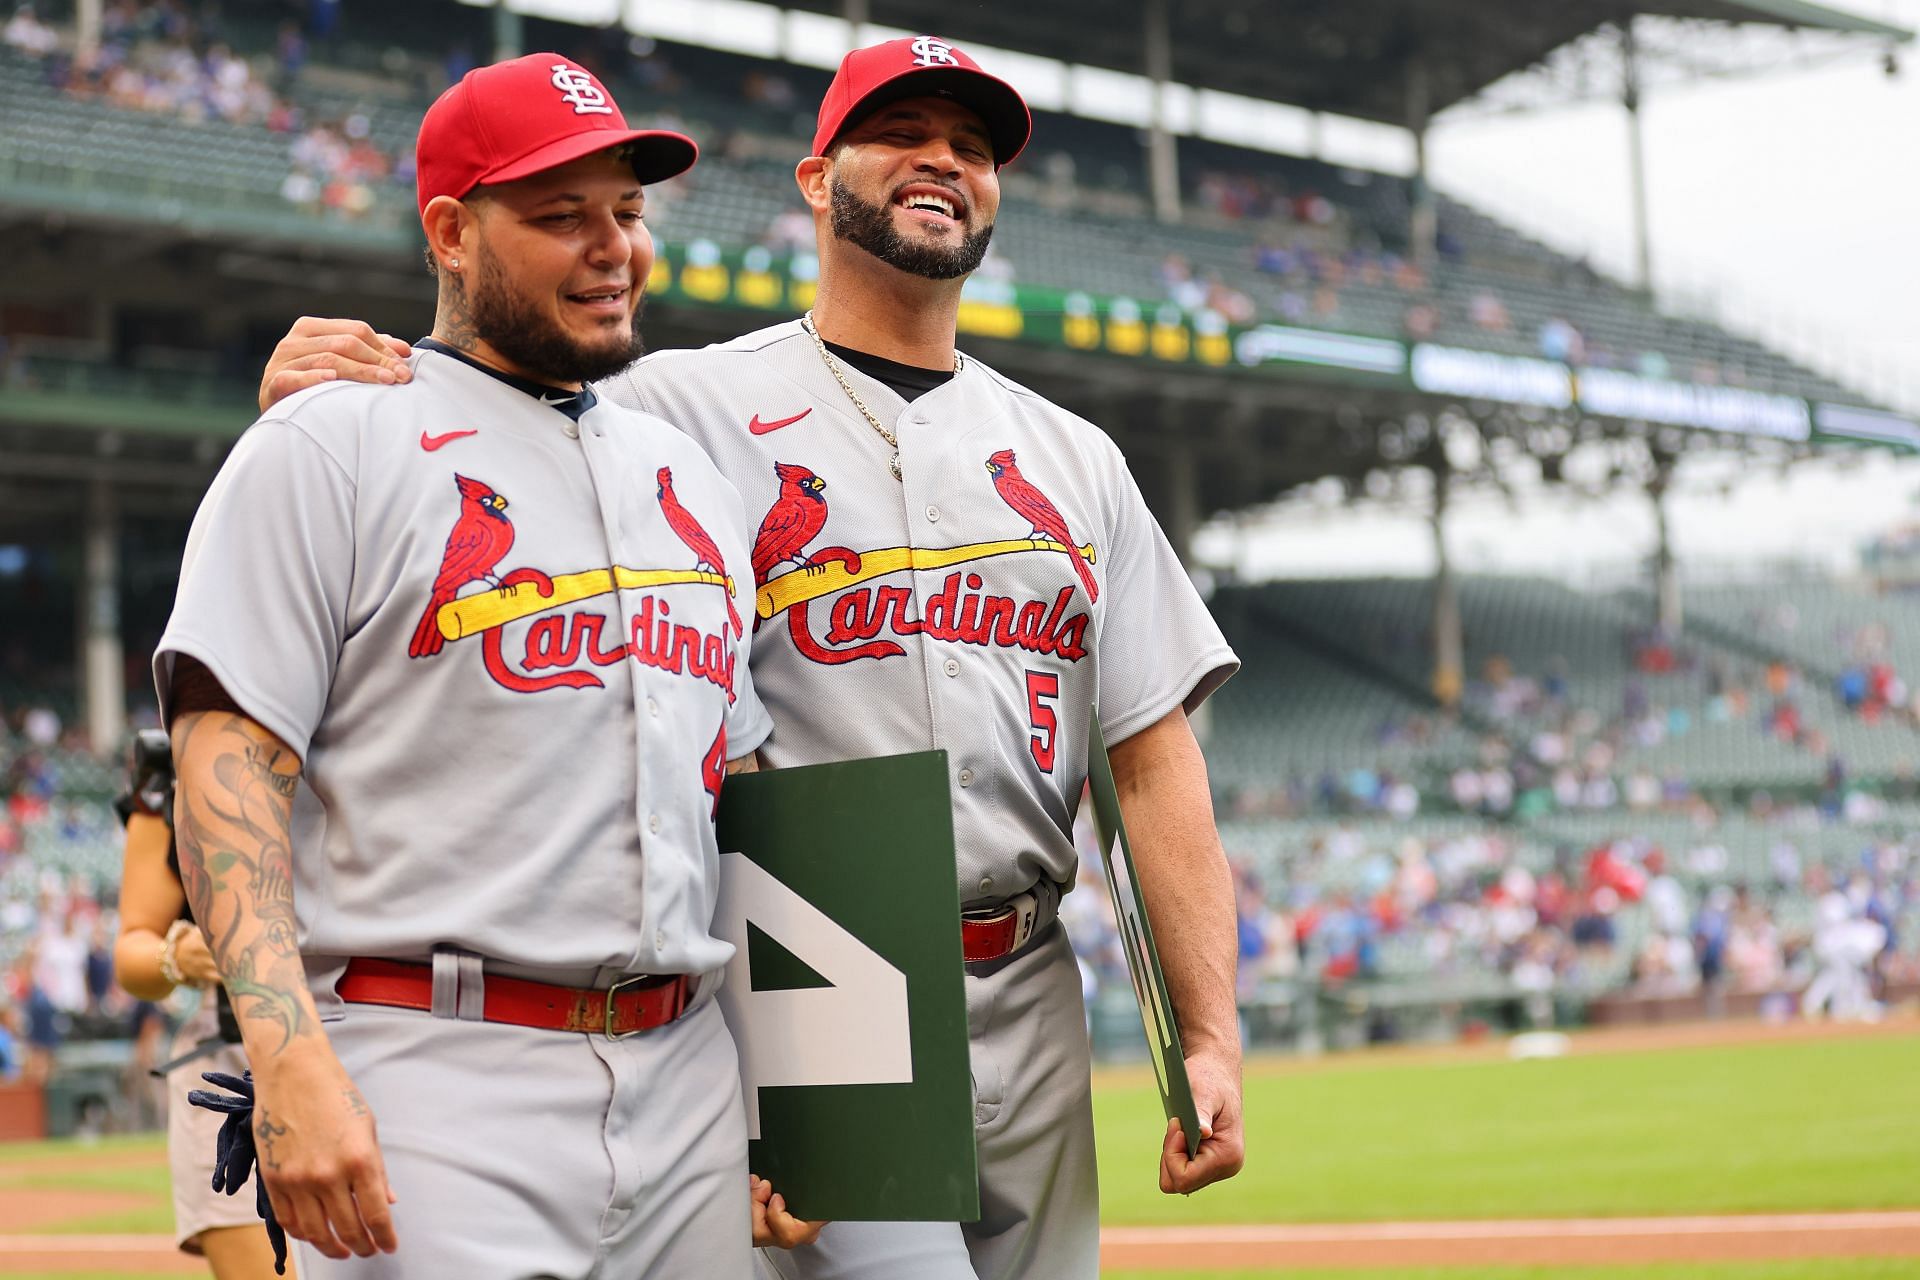 Don't make me cry, Wishing them a happy retirement but I'm still sad -  St. Louis Cardinals fans react to the ending of Albert Pujols and Yadier  Molina's careers